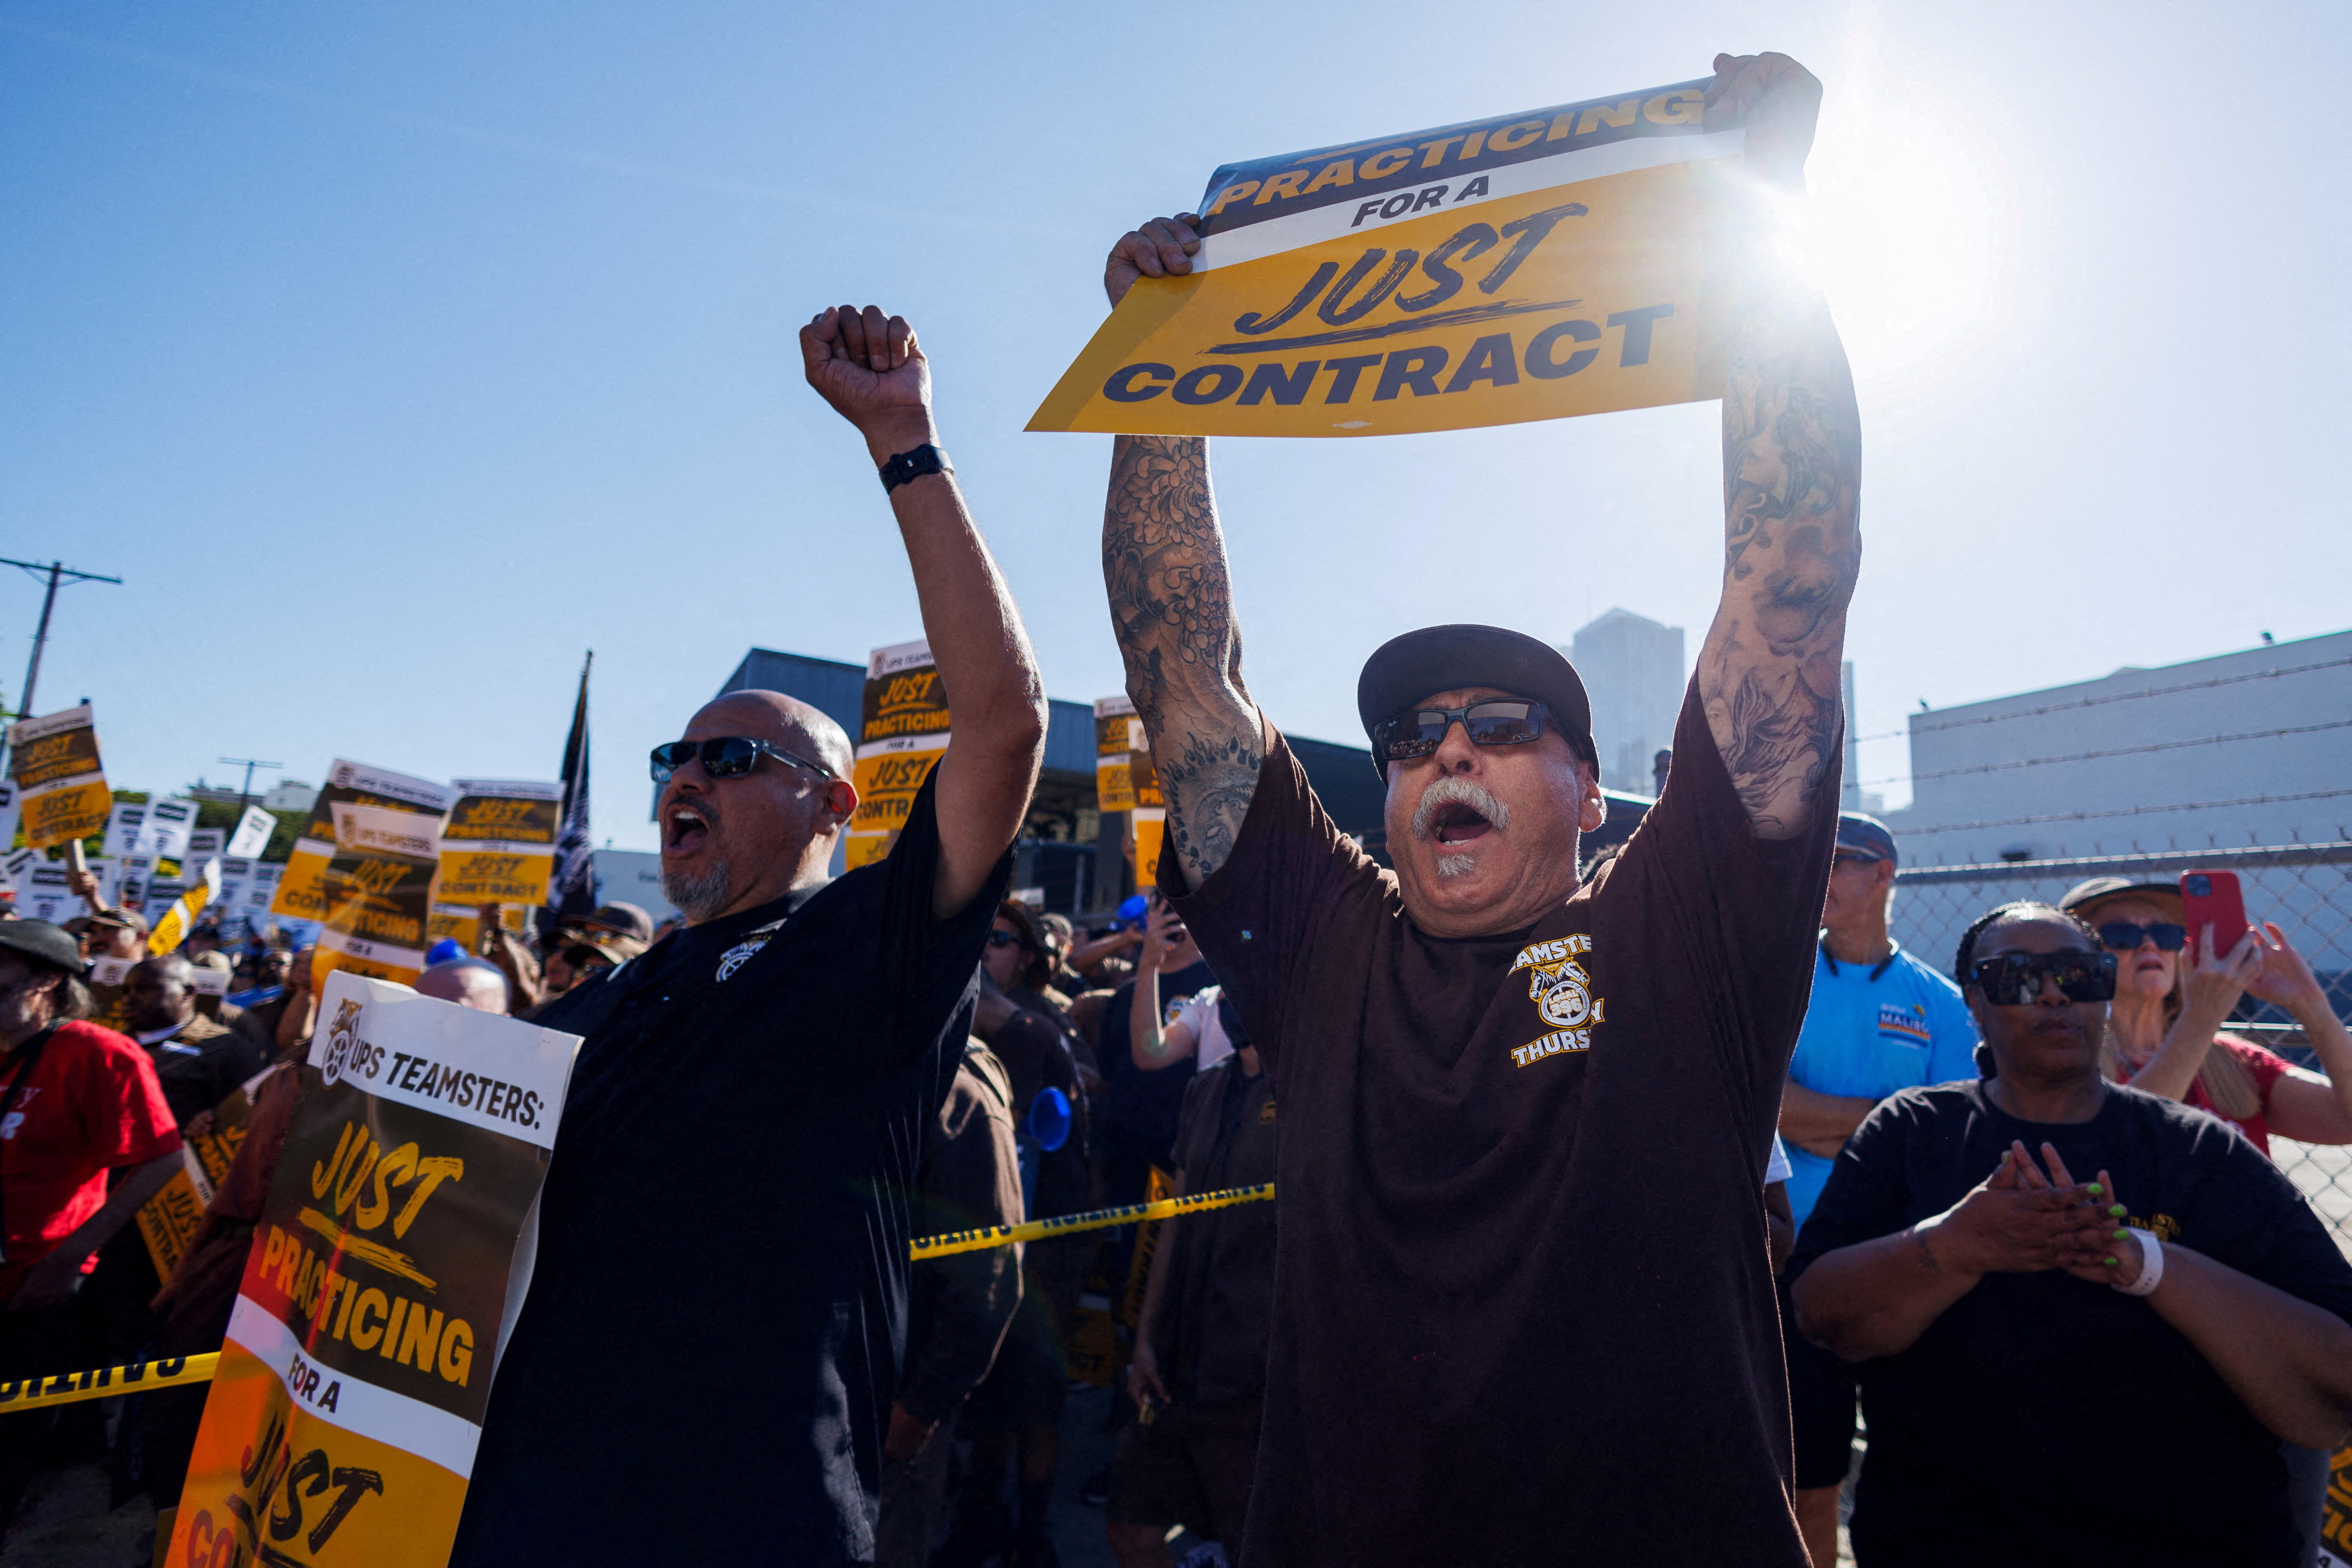 Teamsters employed by UPS hold a rally outside a UPS facility in Los Angeles